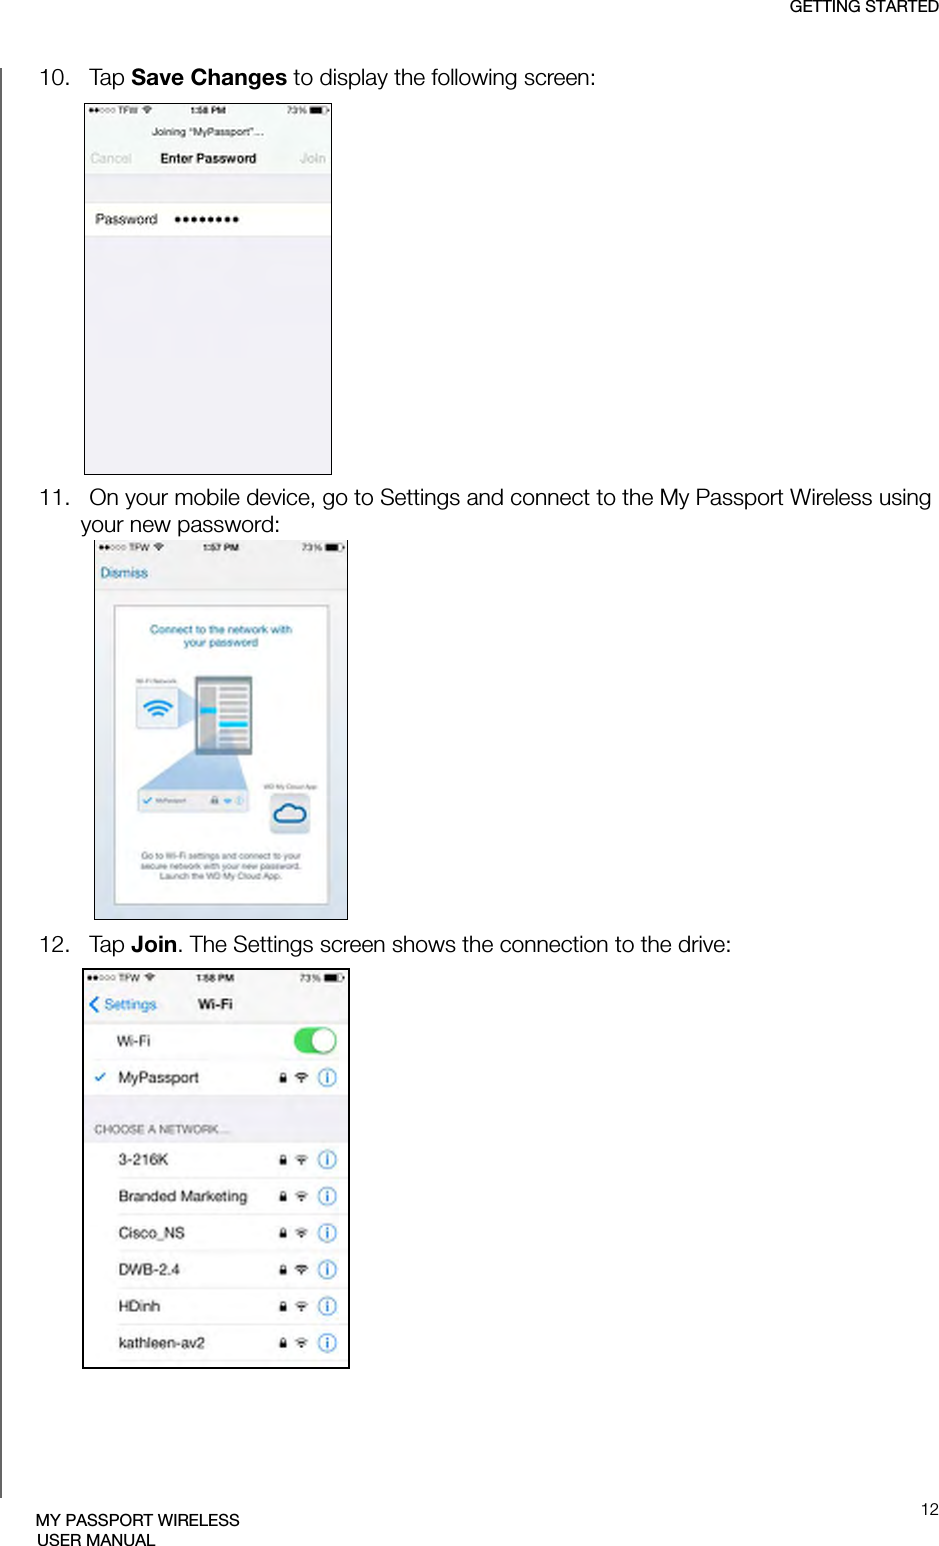 GETTING STARTED12MY PASSPORT WIRELESSUSER MANUAL10.   Tap Save Changes to display the following screen:11.   On your mobile device, go to Settings and connect to the My Passport Wireless using your new password:12.   Tap Join. The Settings screen shows the connection to the drive: